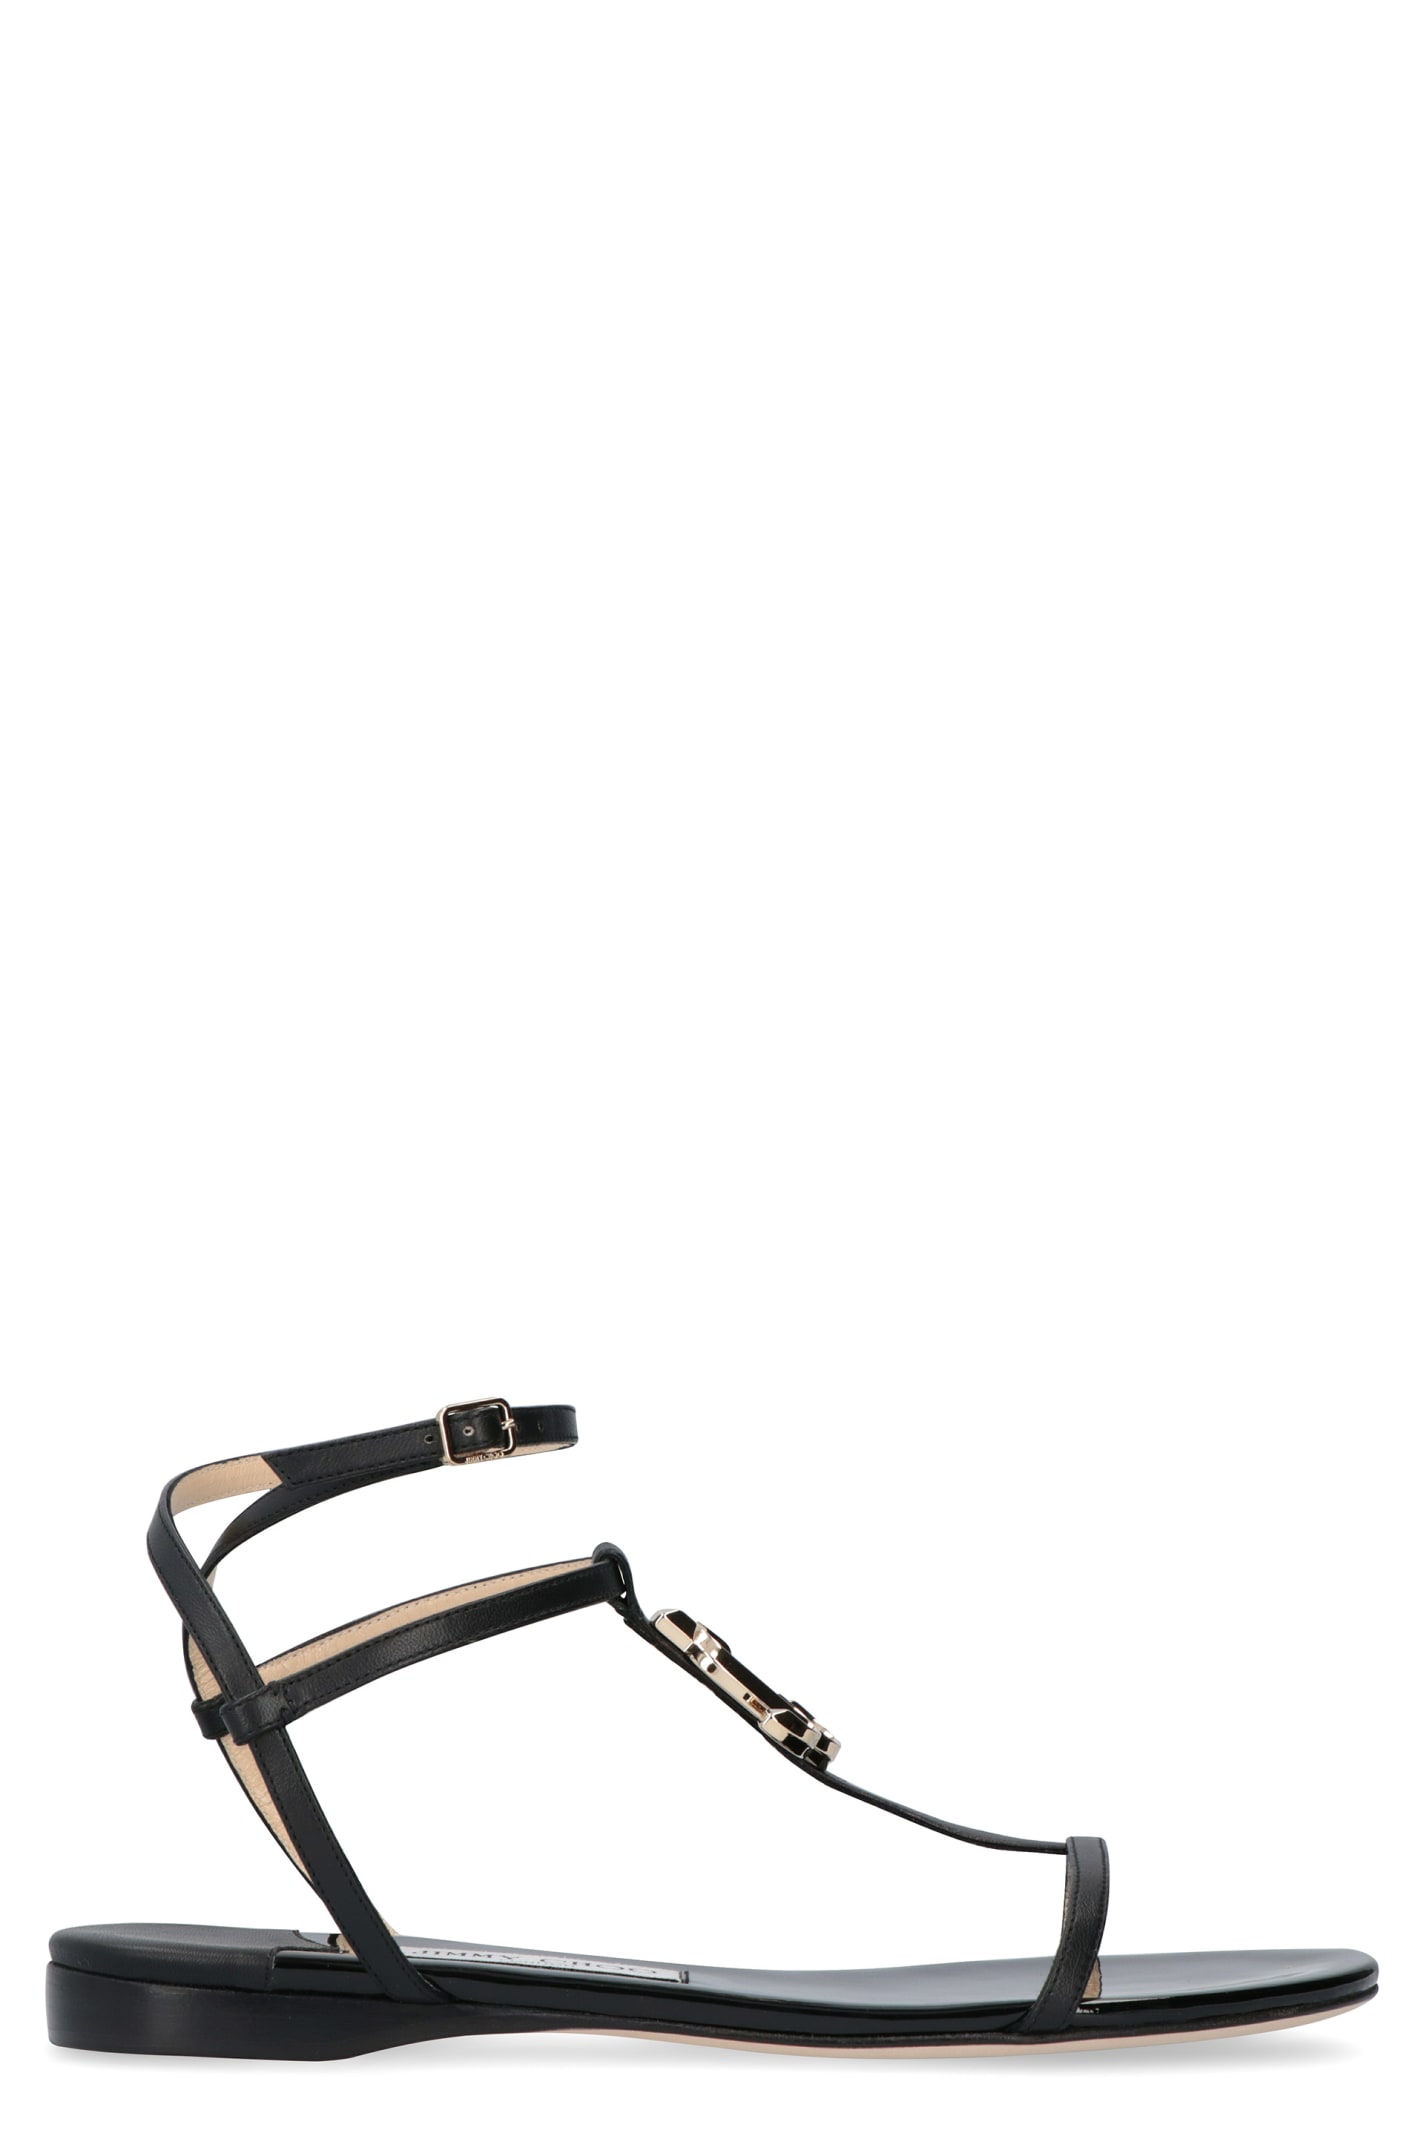 Buy Jimmy Choo Alodie Logo Detail Leather Sandals online, shop Jimmy Choo shoes with free shipping